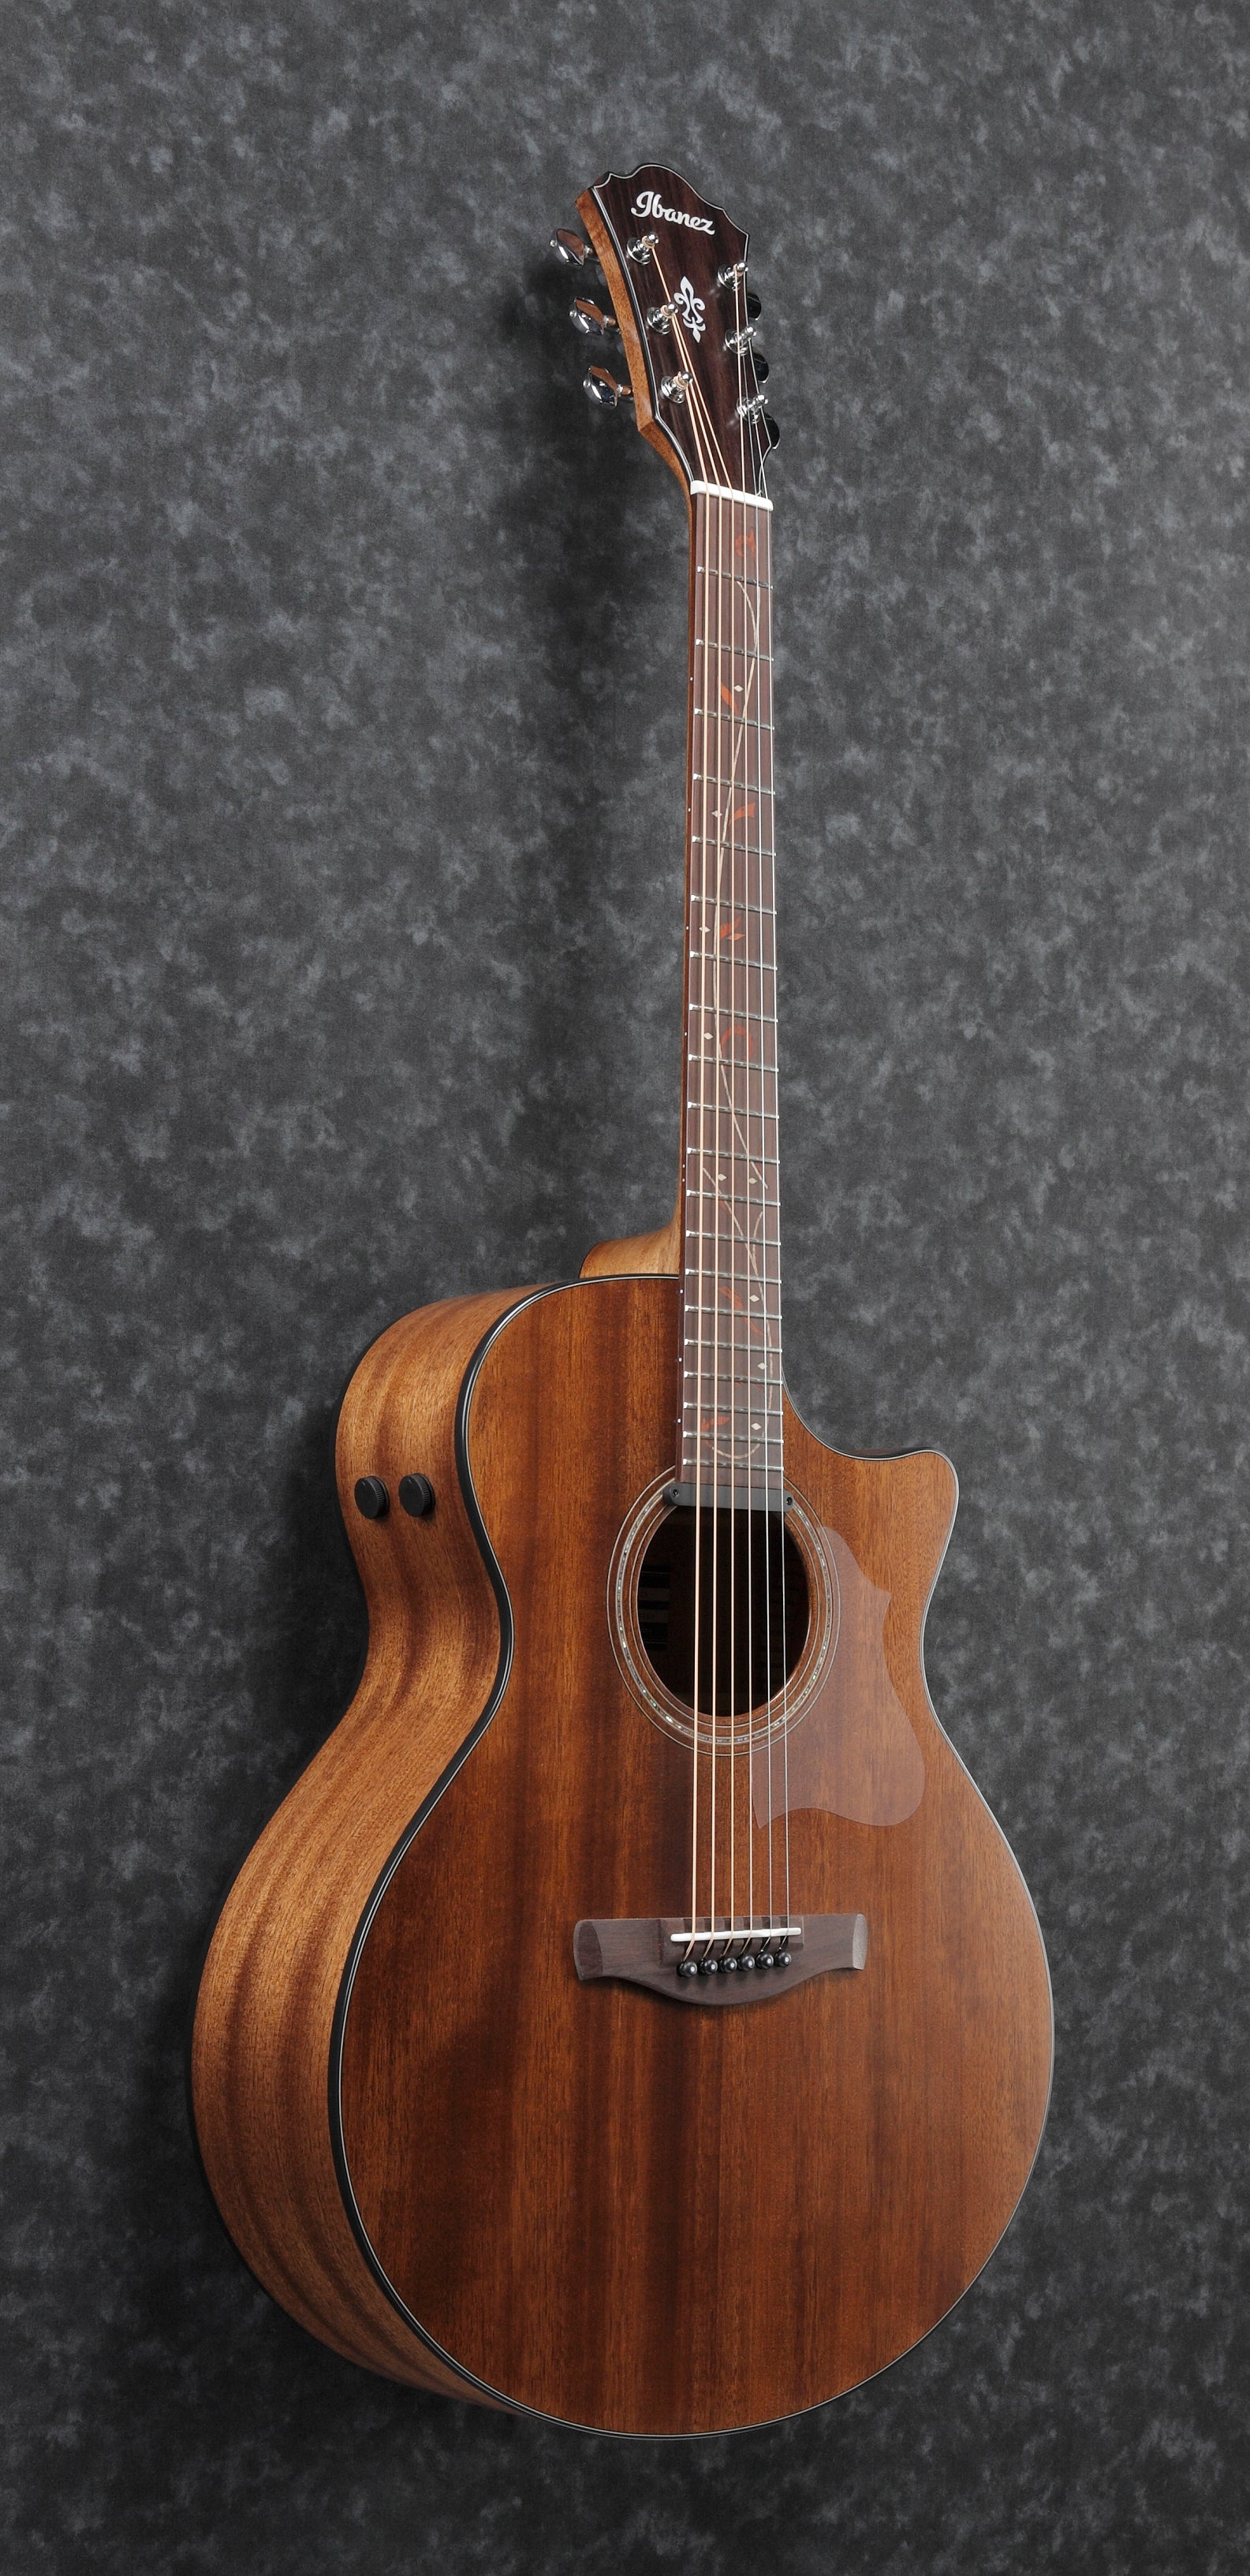 Ibanez AE295 Acoustic Guitar - Natural Low Gloss木結他